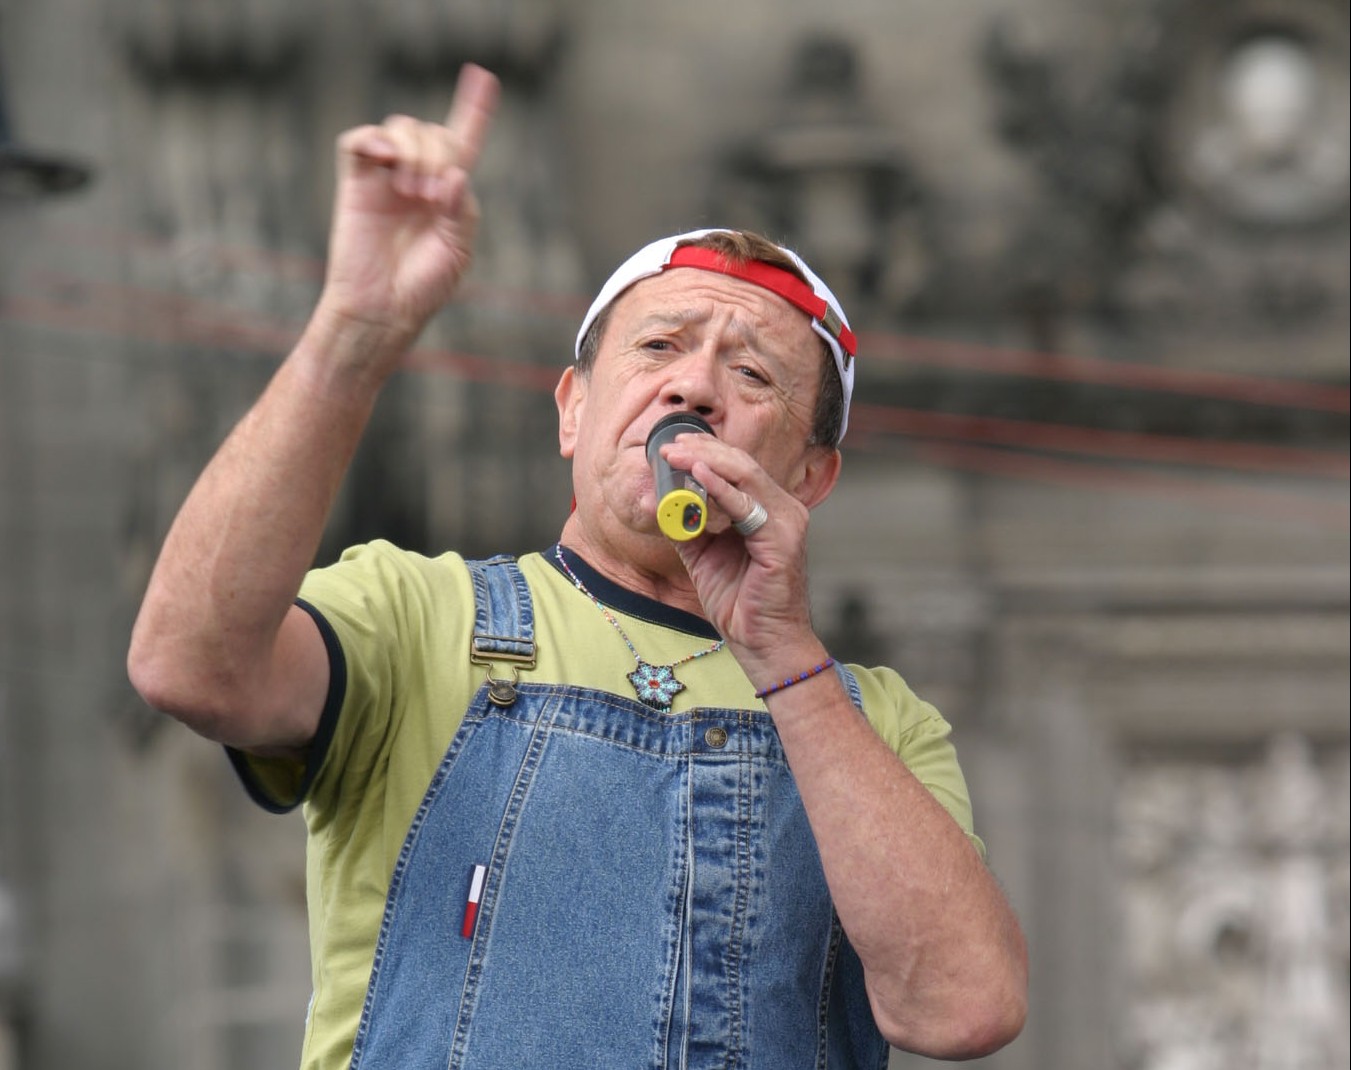 MEXICO, DF AUGUST 21, 2005.- Chabelo during his participation in the Quierlos concert for the benefit of street children that took place in the Zócalo of Mexico City.  PHOTO: Nelly Salas/CUARTOSCURO.COM